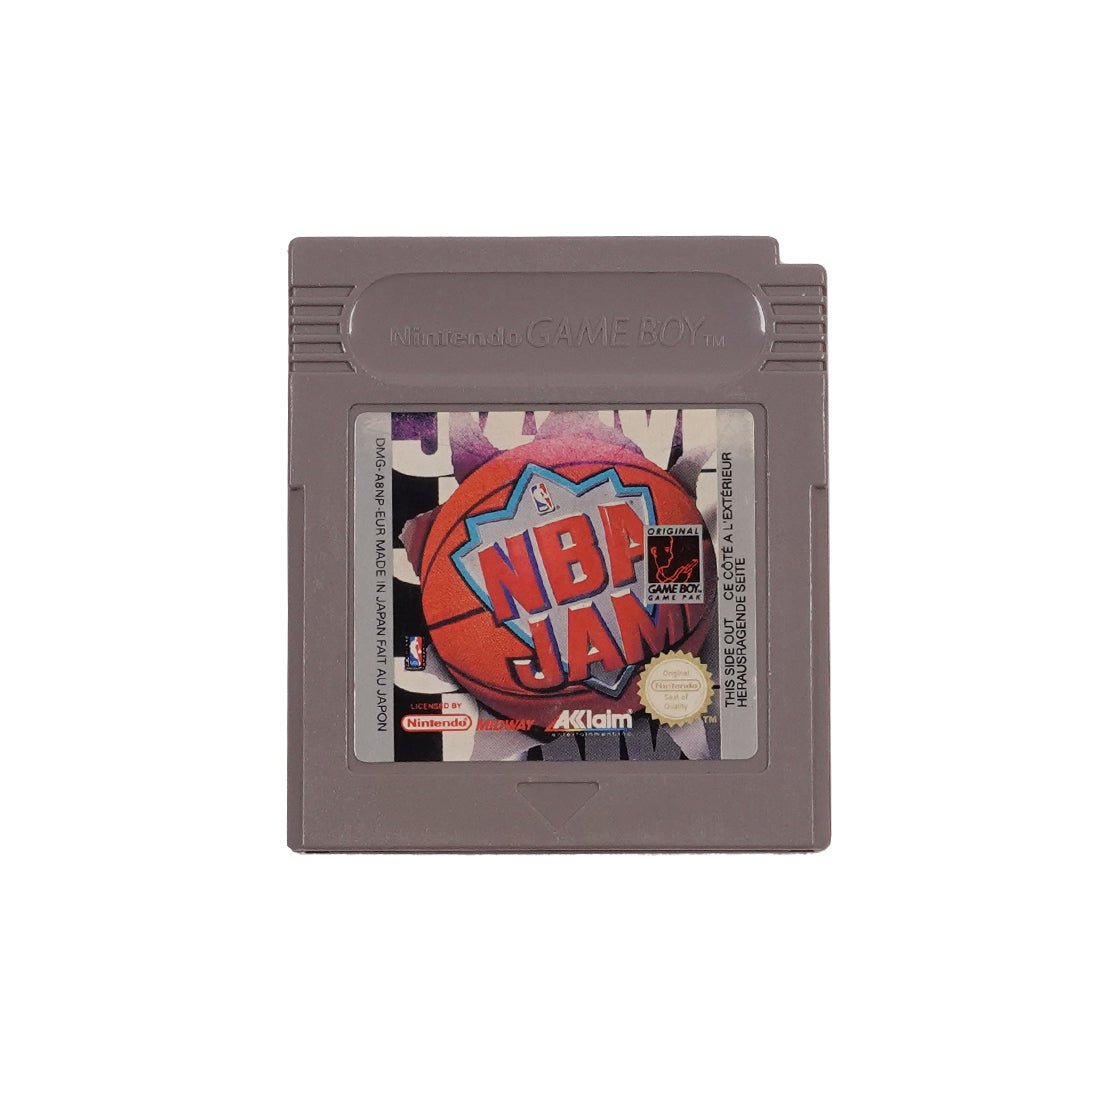 (Pre-Owned) NBA Jam - Gameboy Classic - Store 974 | ستور ٩٧٤